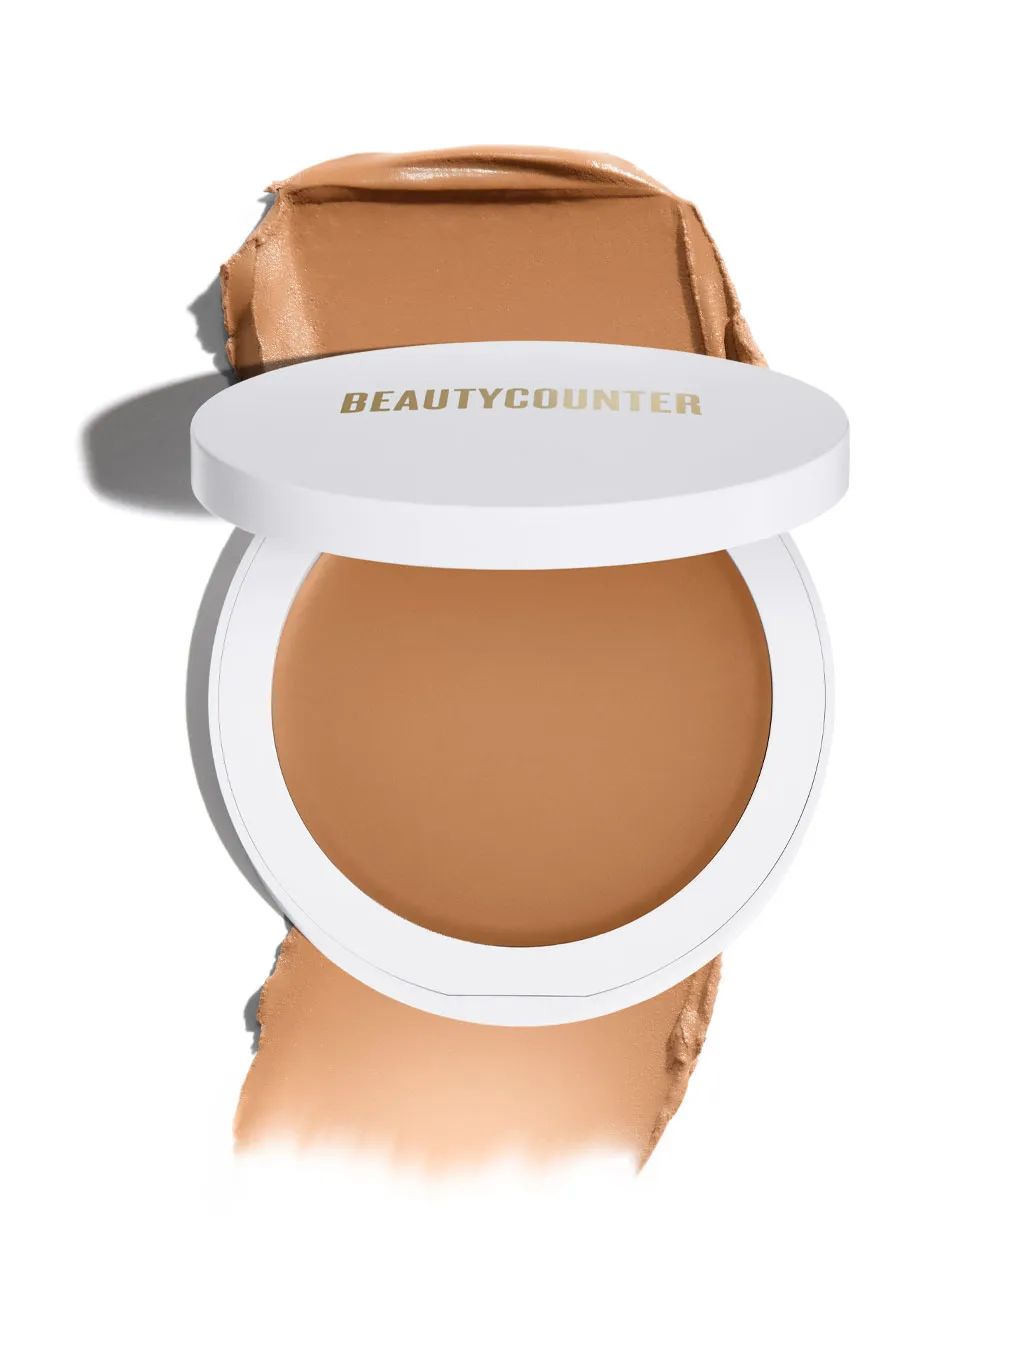 Cheeky Clean Cream Bronzer - Beautycounter - Skin Care, Makeup, Bath and Body and more! | Beautycounter.com